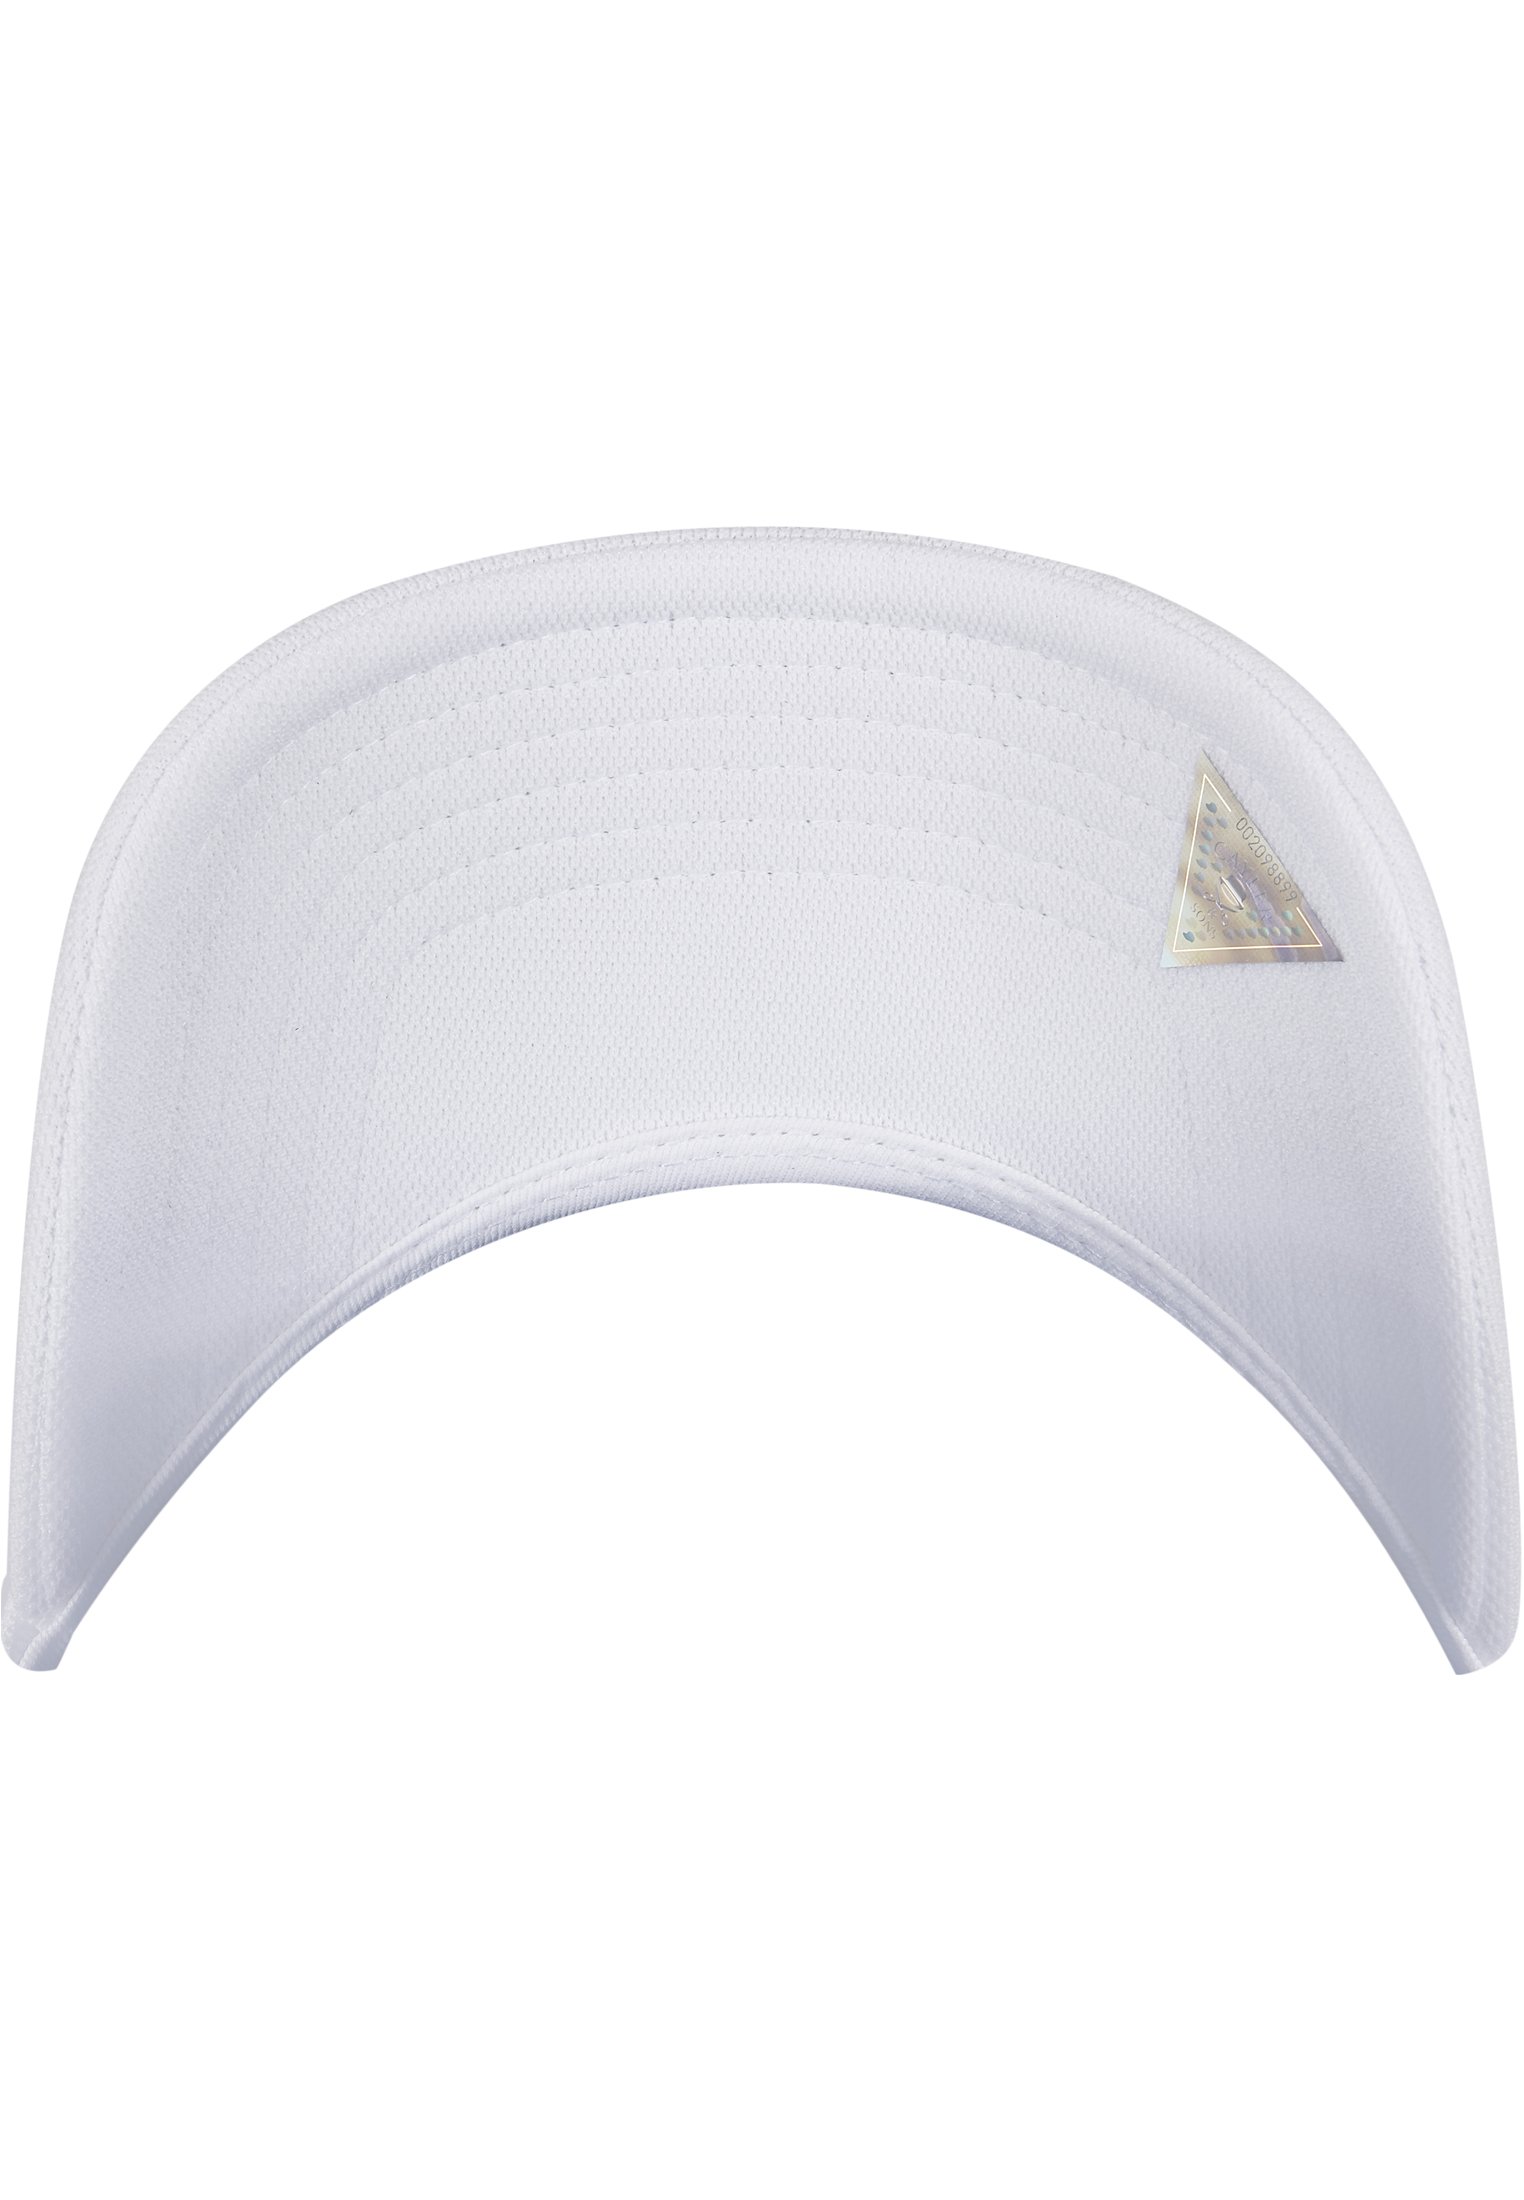 C&S WL Forever Six Curved Cap white/mc one size